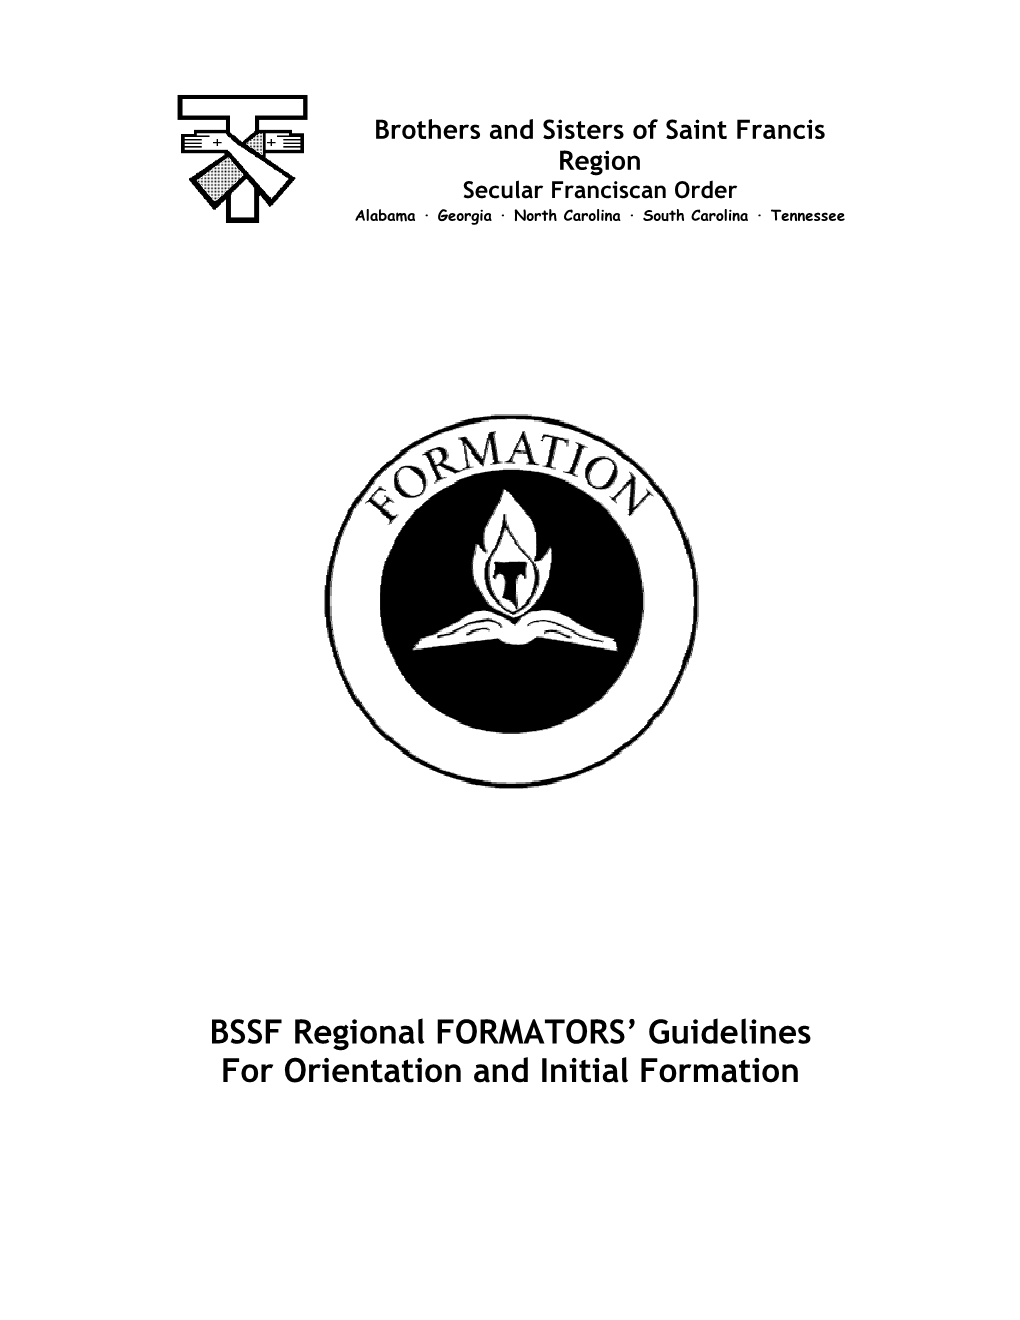 BSSF Regional FORMATORS' Guidelines for Orientation And